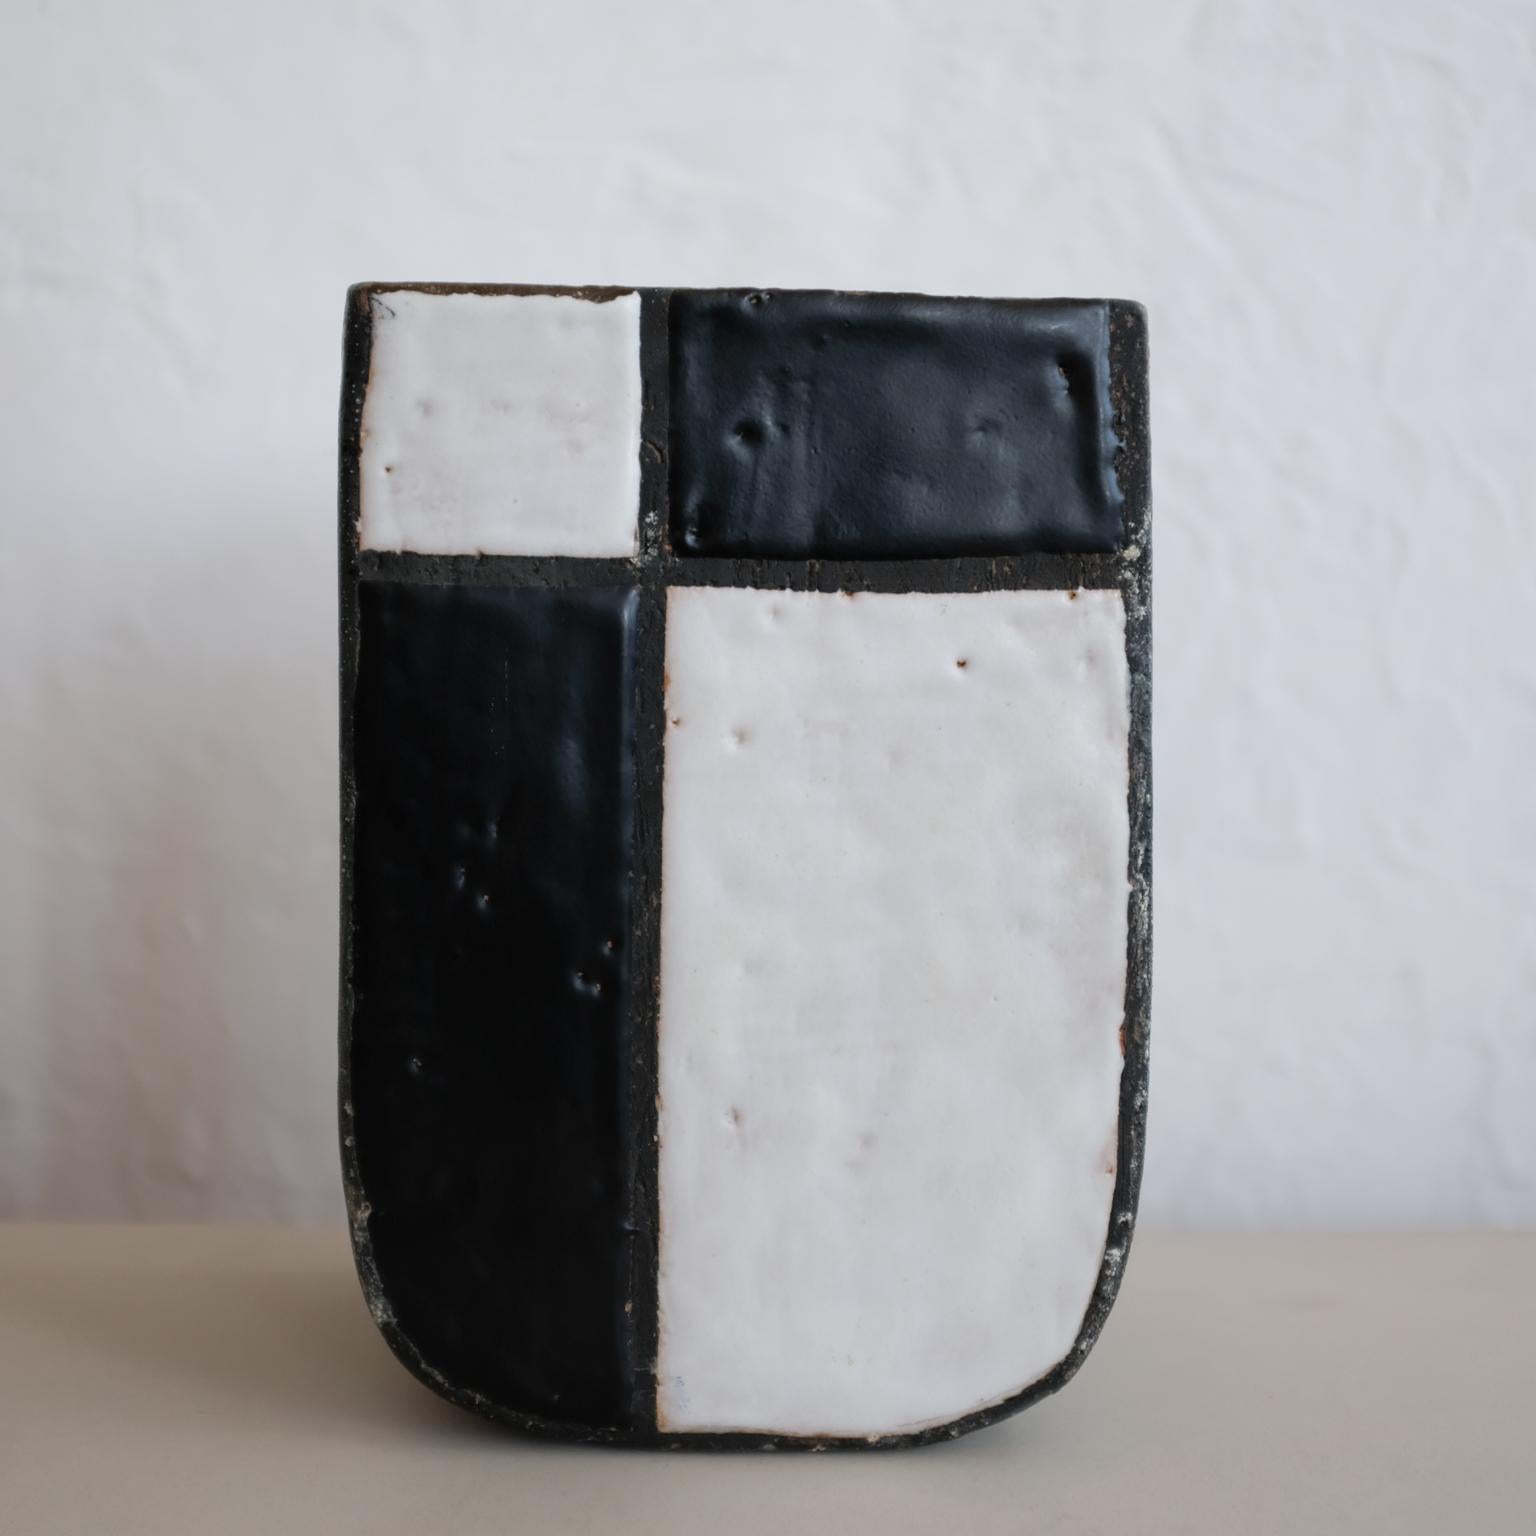 Bitossi for Raymor black, white and brown geometric vase. Glazed ceramic design is on the front and back. Signed Italy and includes the original Raymor tag with 